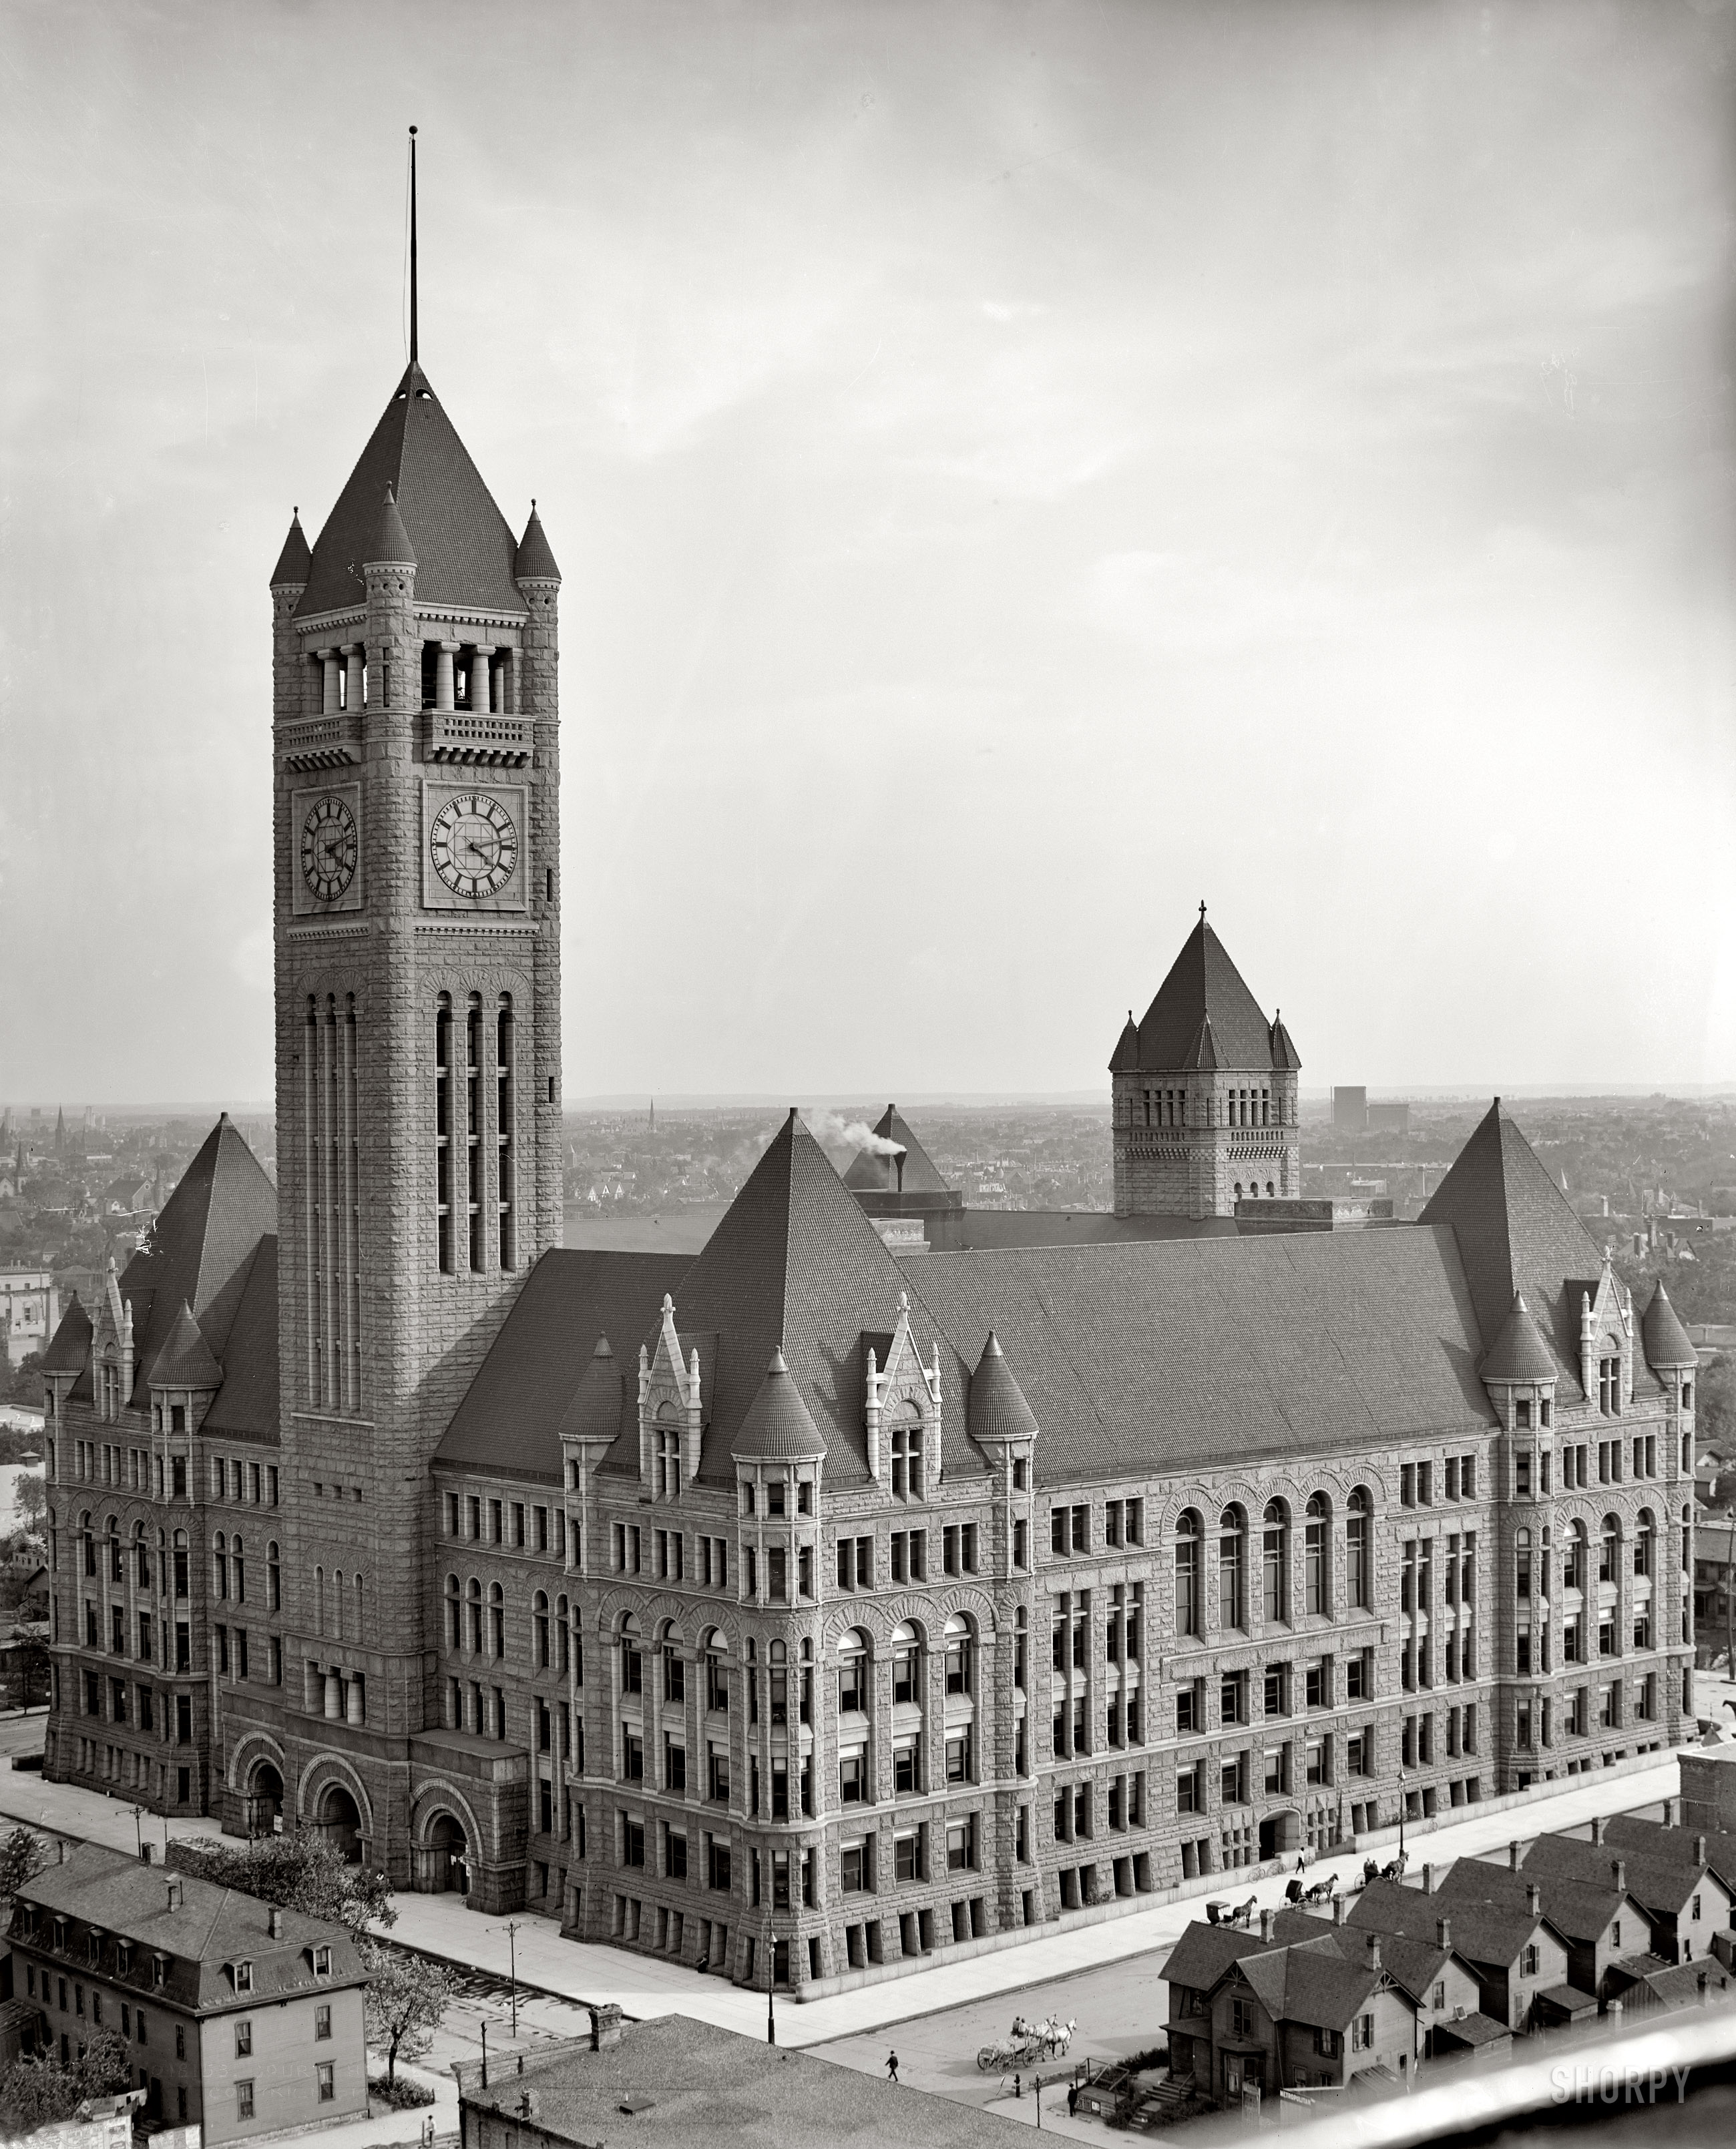 Minneapolis, Minnesota, circa 1905. "Courthouse and City Hall." Look at the time! 8x10 inch dry plate glass negative, Detroit Publishing Company. View full size.